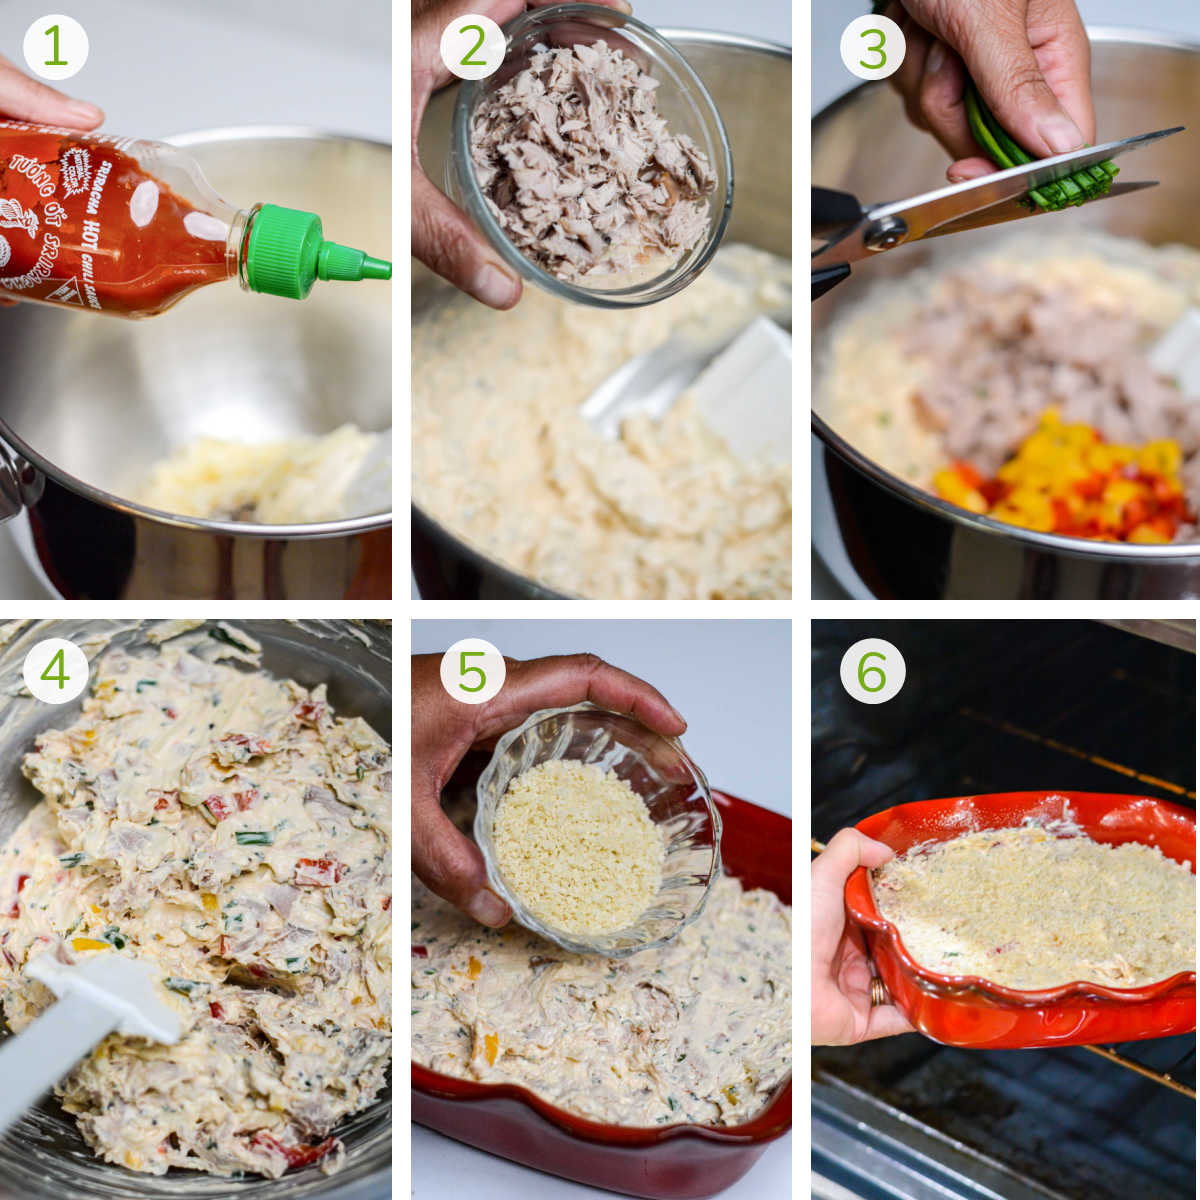 instruction photos showing adding the ingredients to a large bowl, mixing, adding to baking dish and adding the smoked tuna dip to the oven.